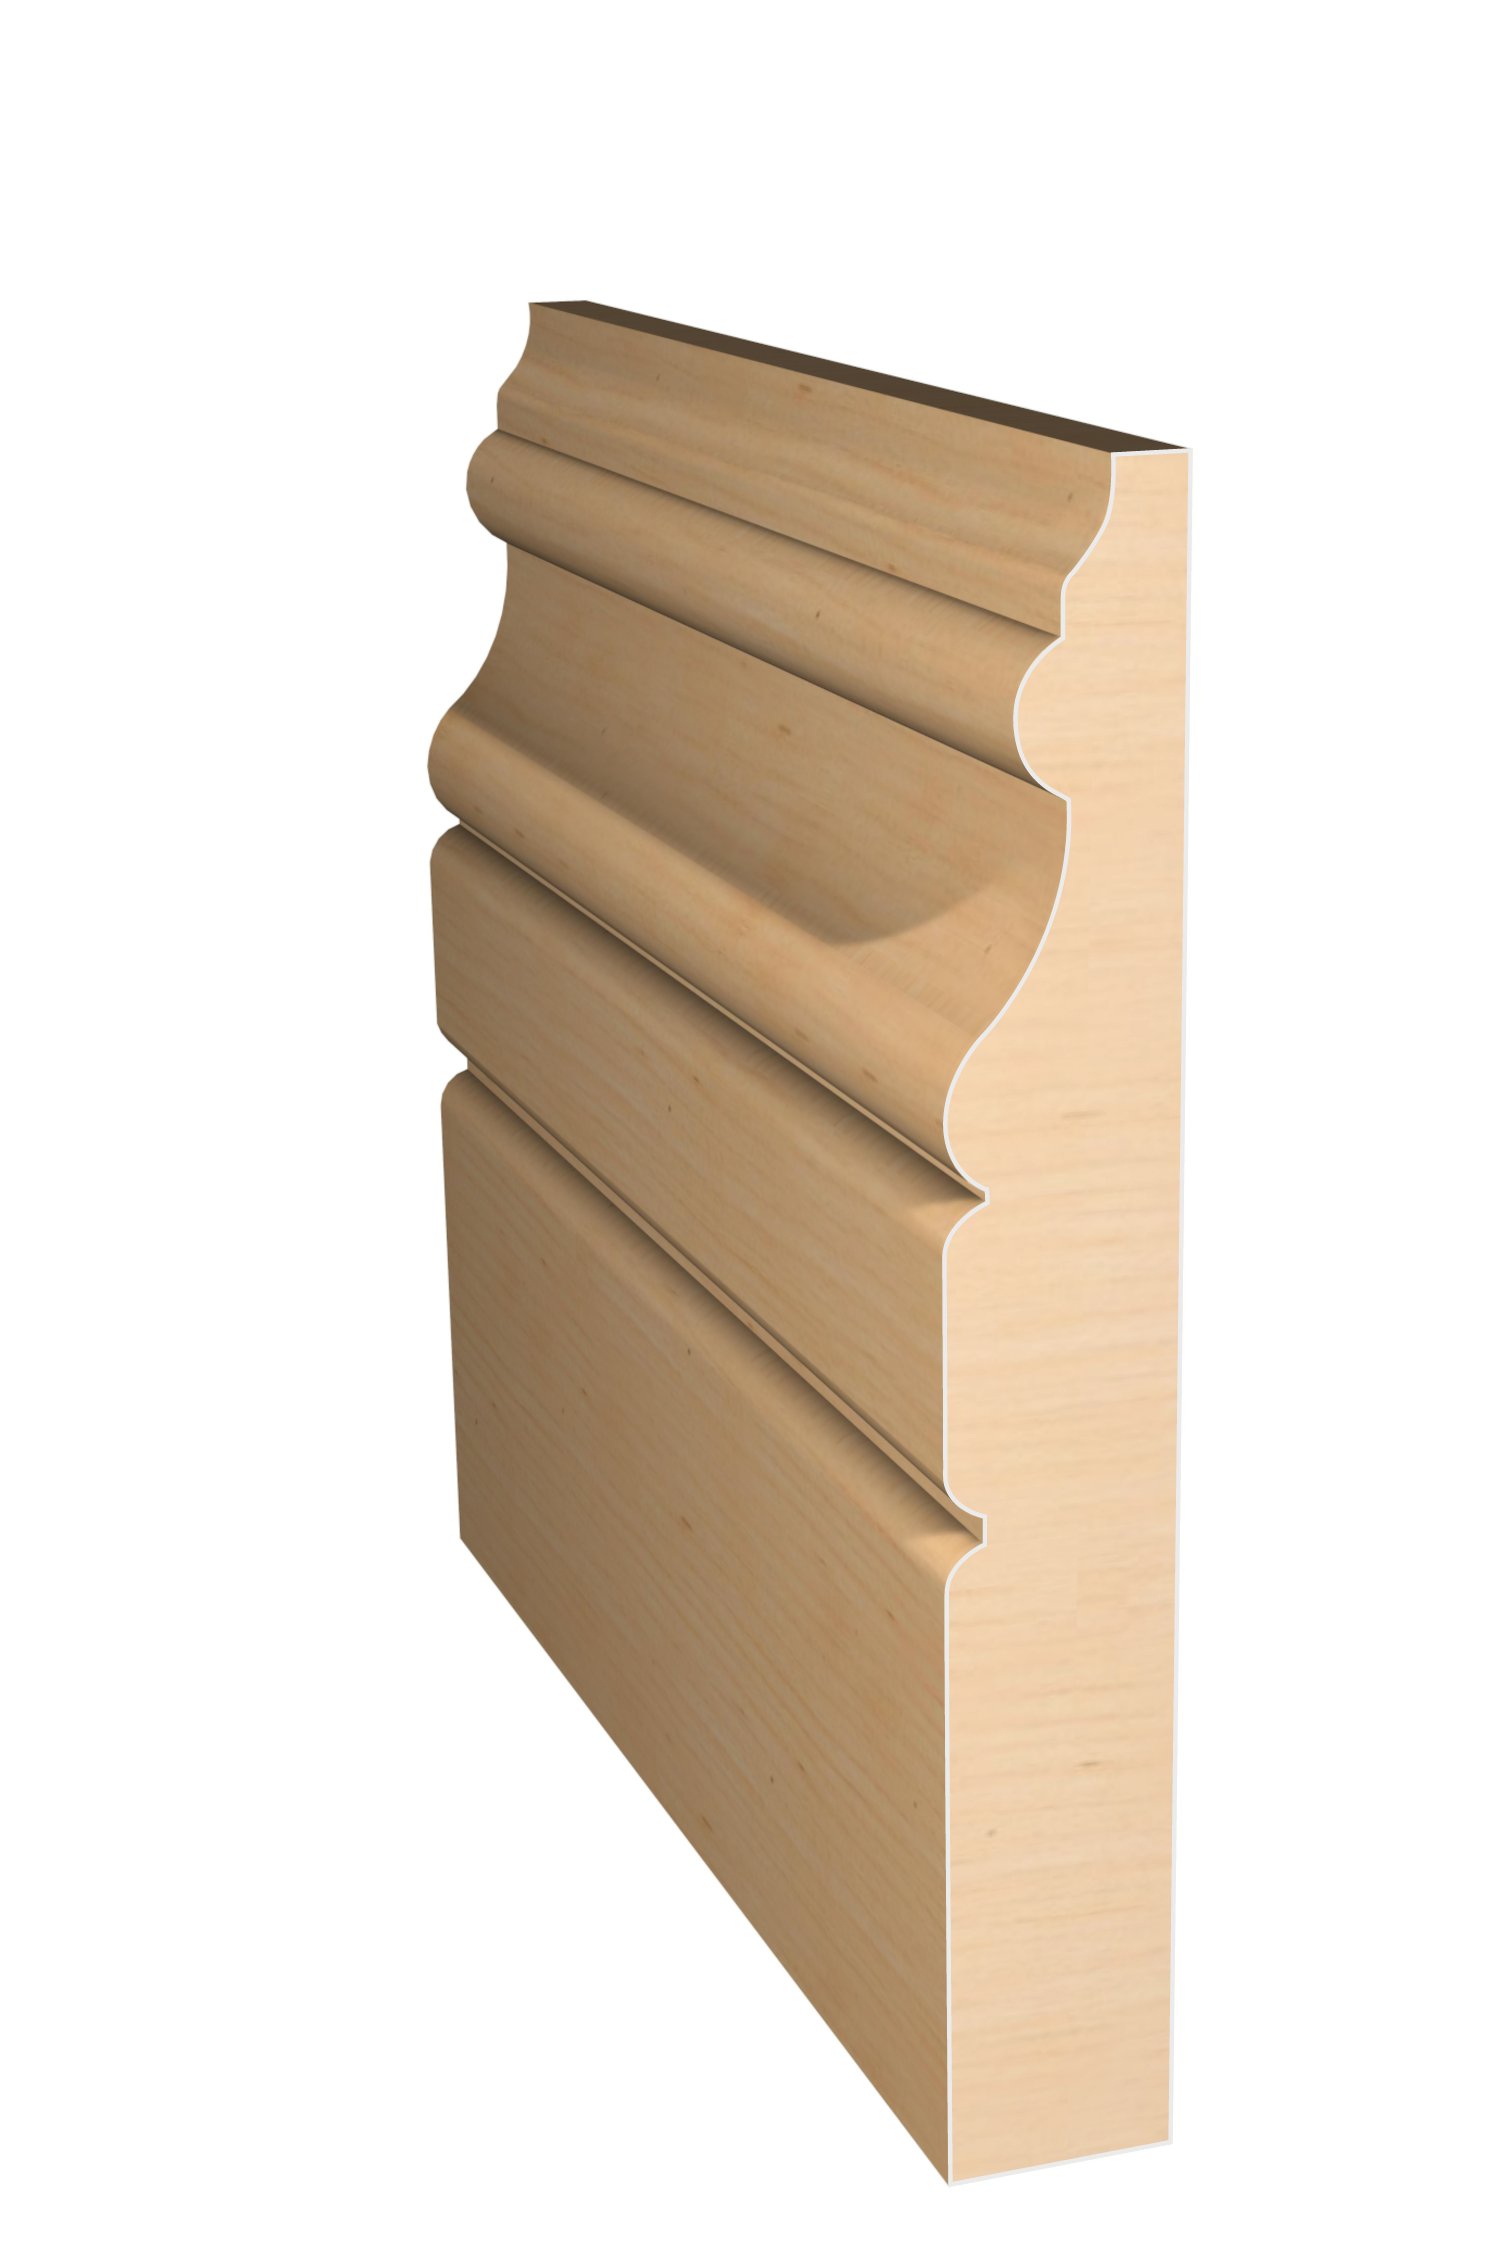 Three dimensional rendering of signature stock base wood molding BAPL5148 made by Public Lumber Company in Detroit.